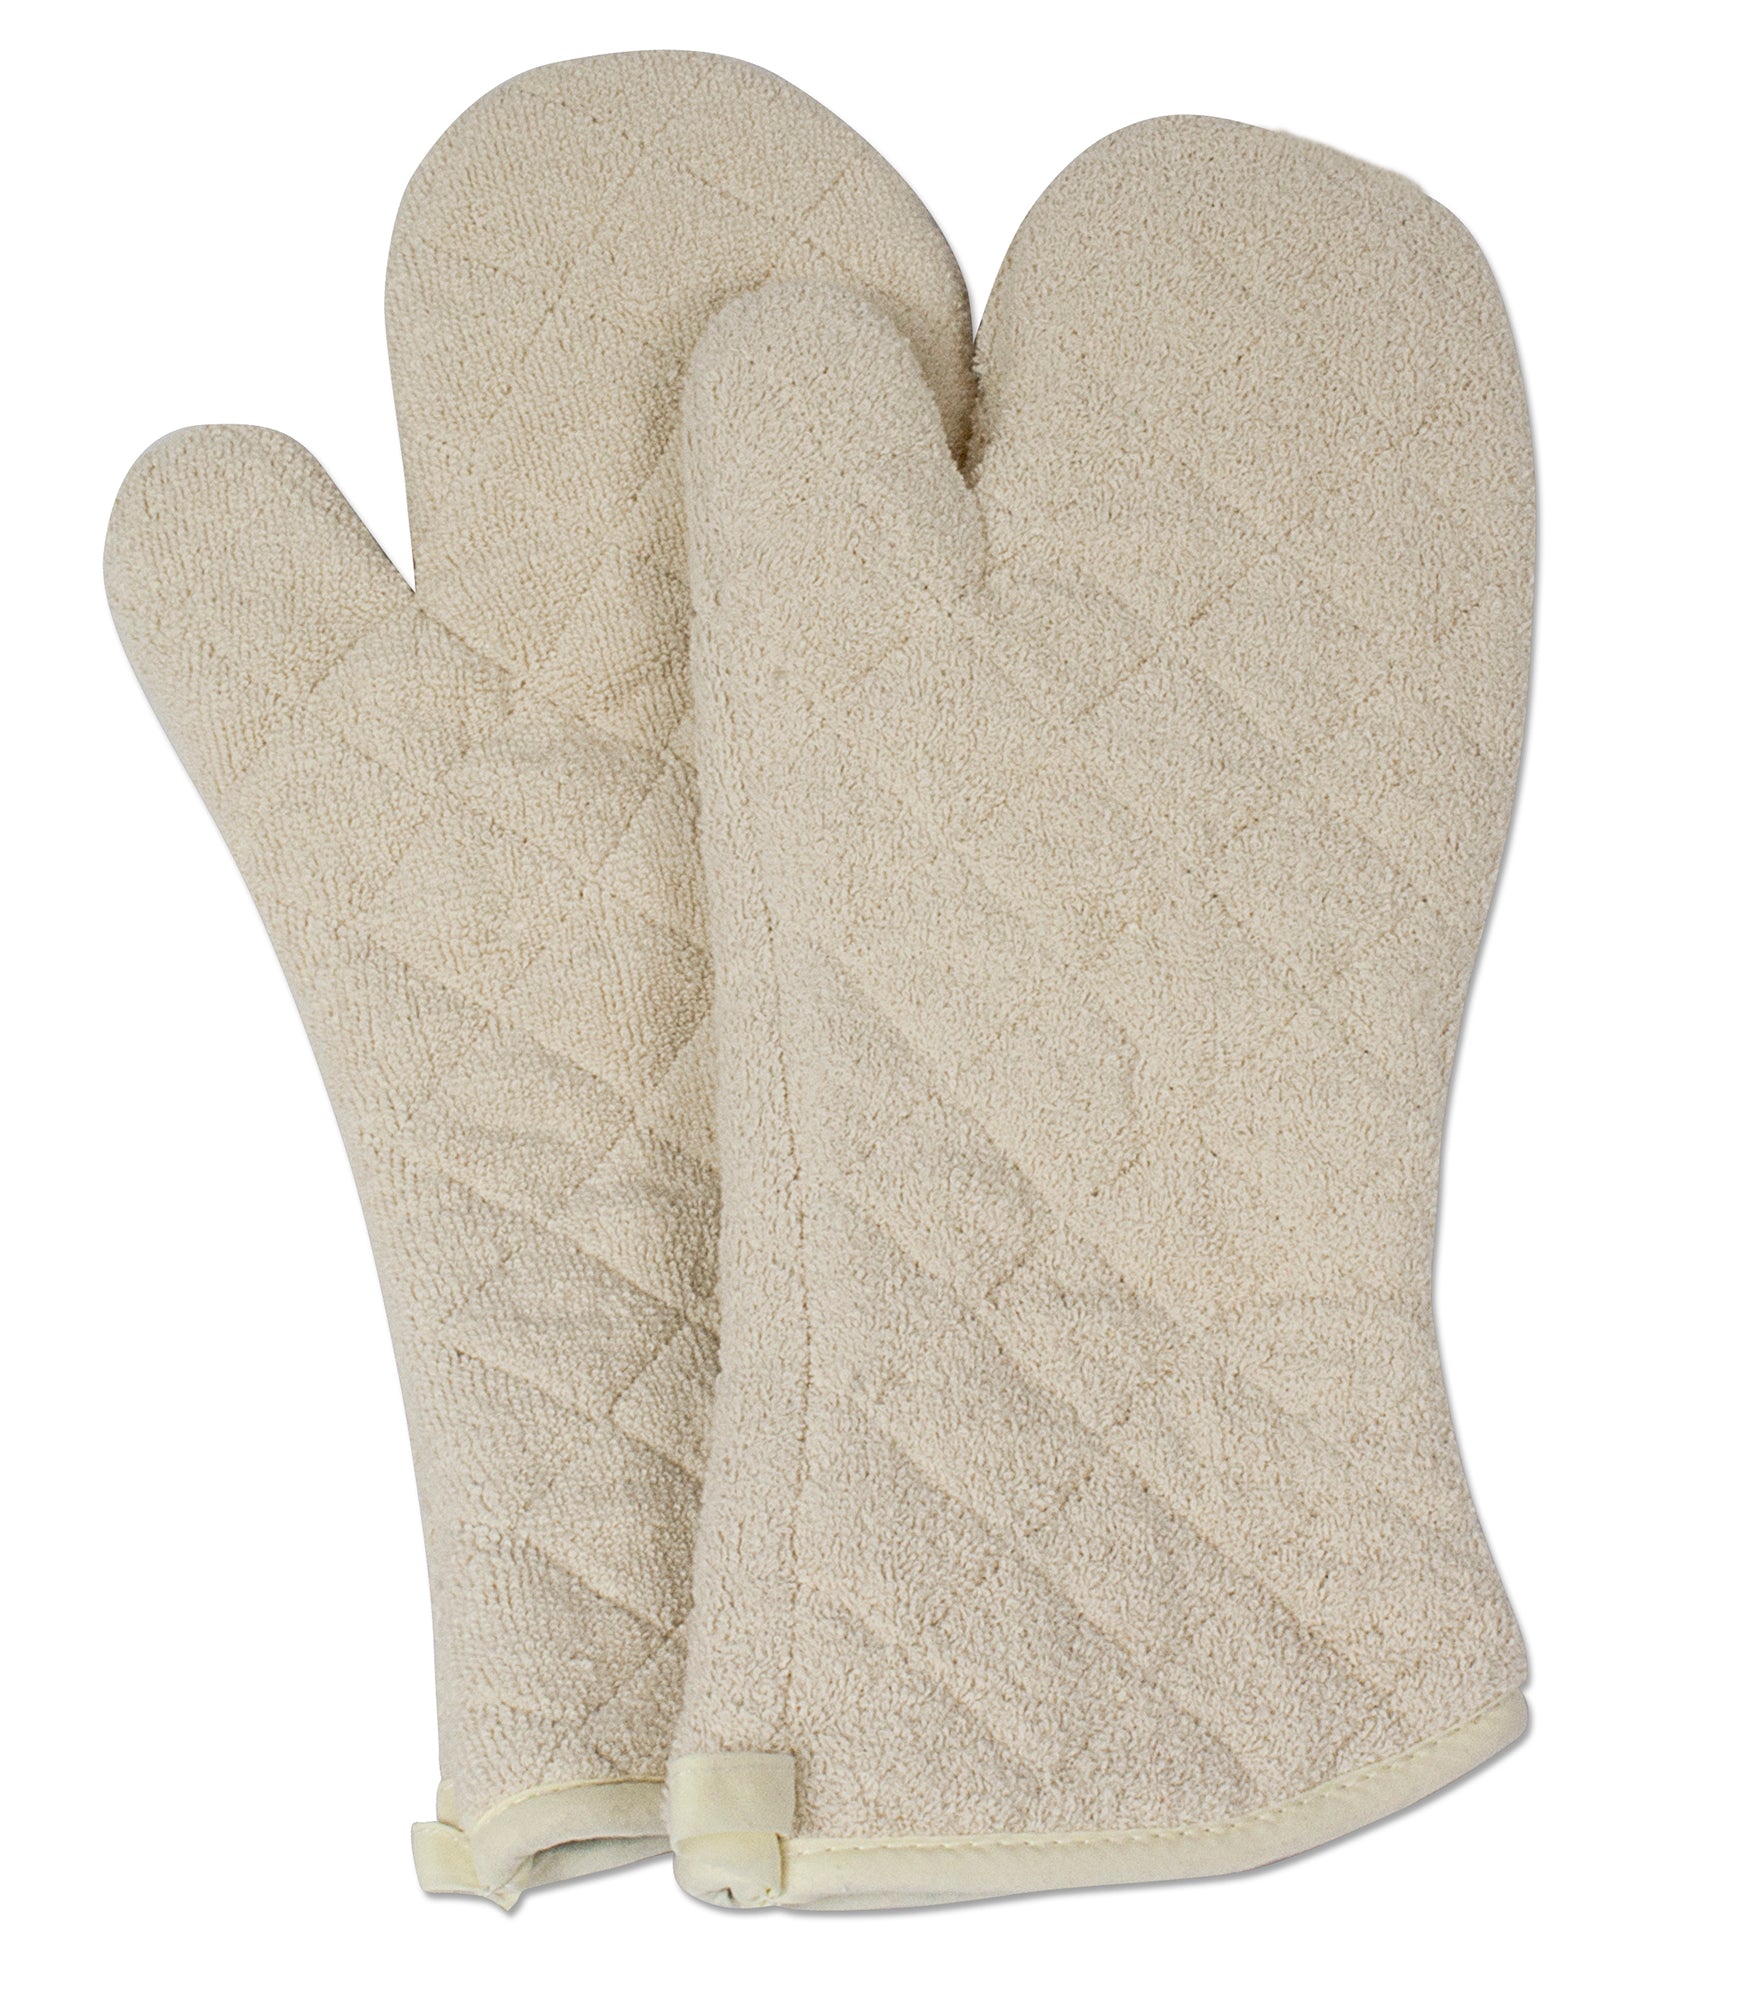 13 Terry Oven Mitts with Steam Barrier